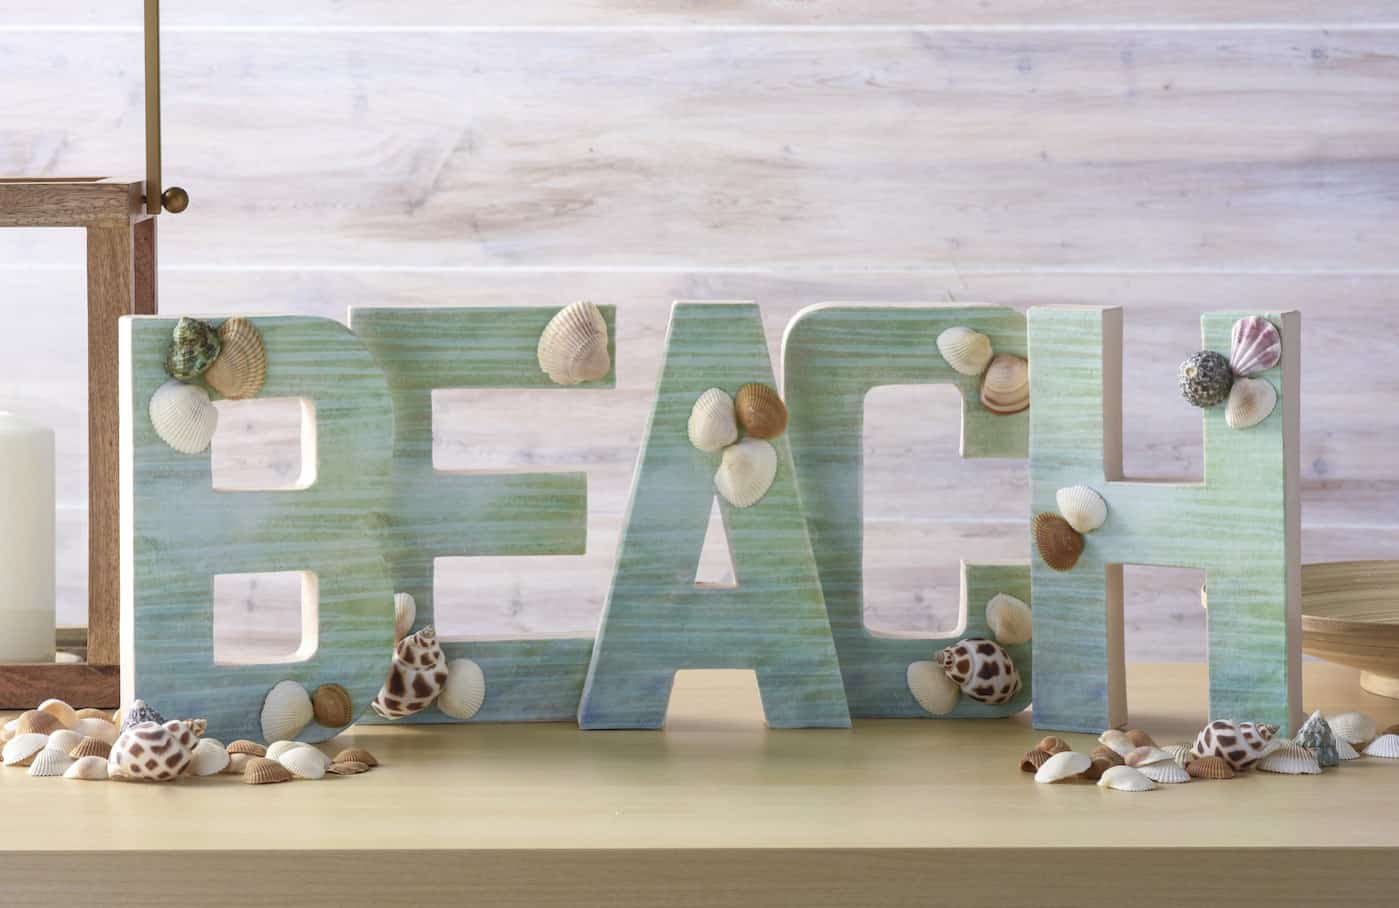 Beachy themed letters